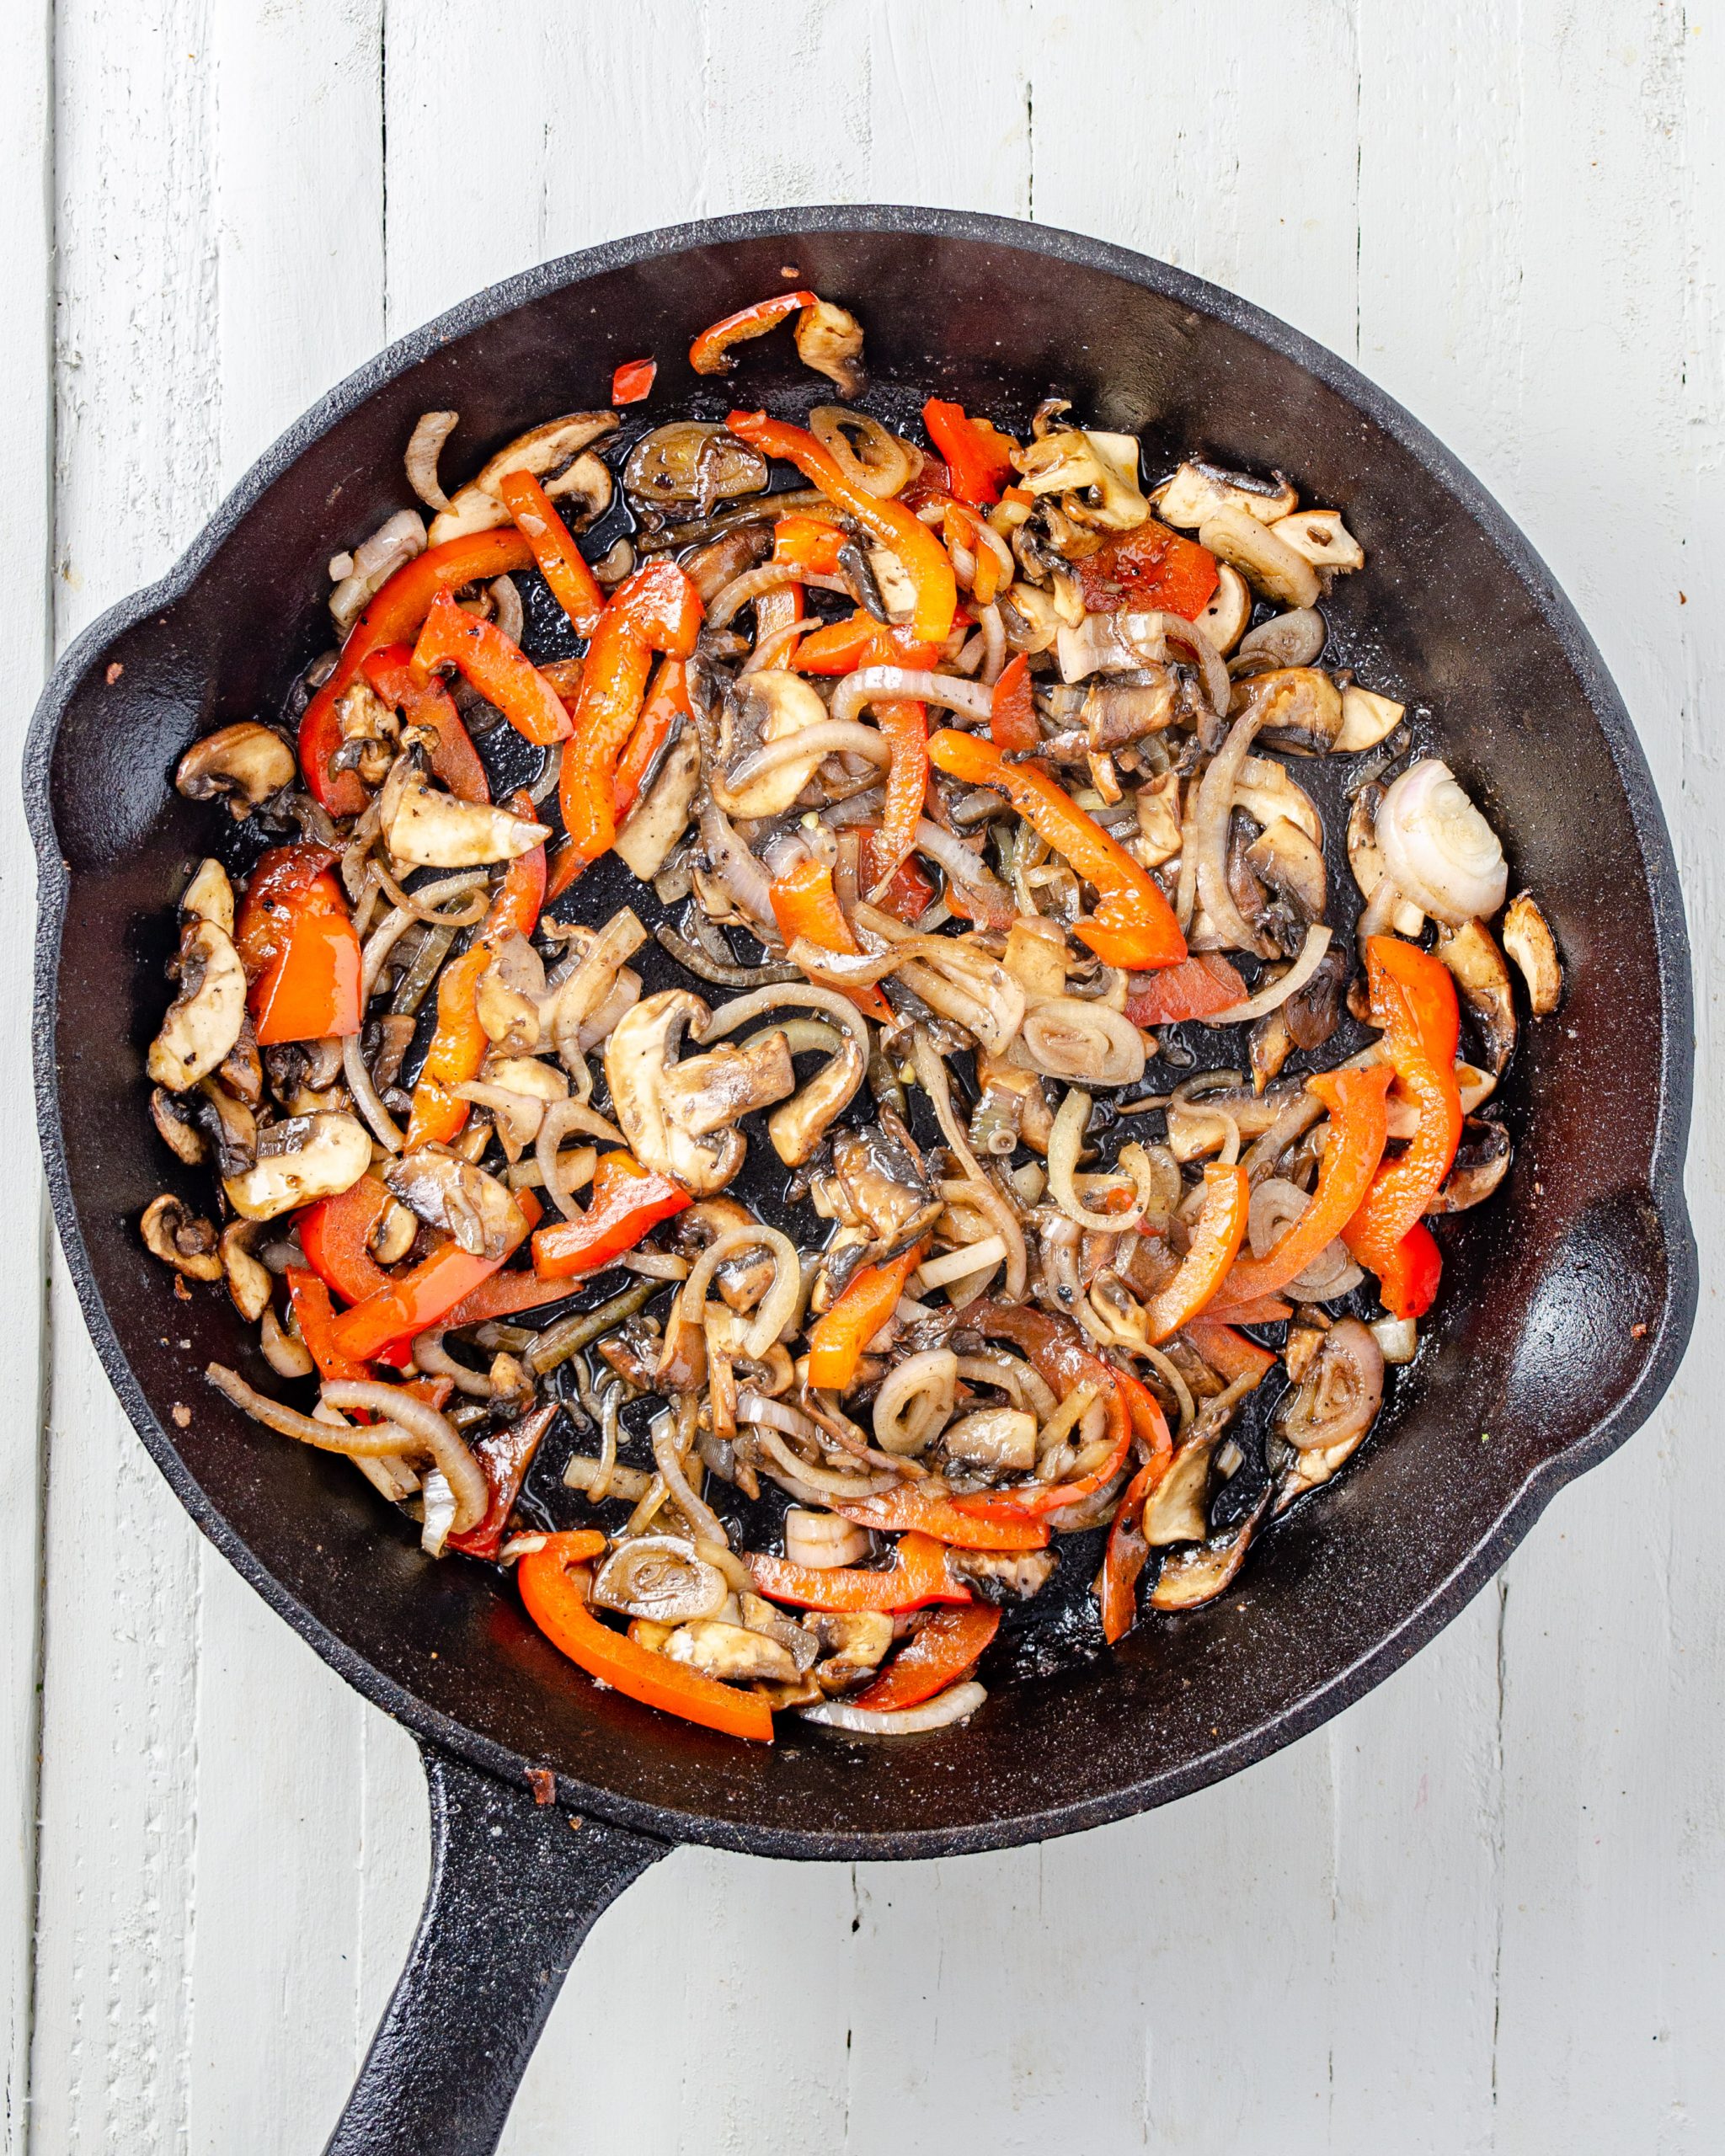 Add the mushrooms, red bell pepper, and onion to the skillet, and saute until becoming tender. 